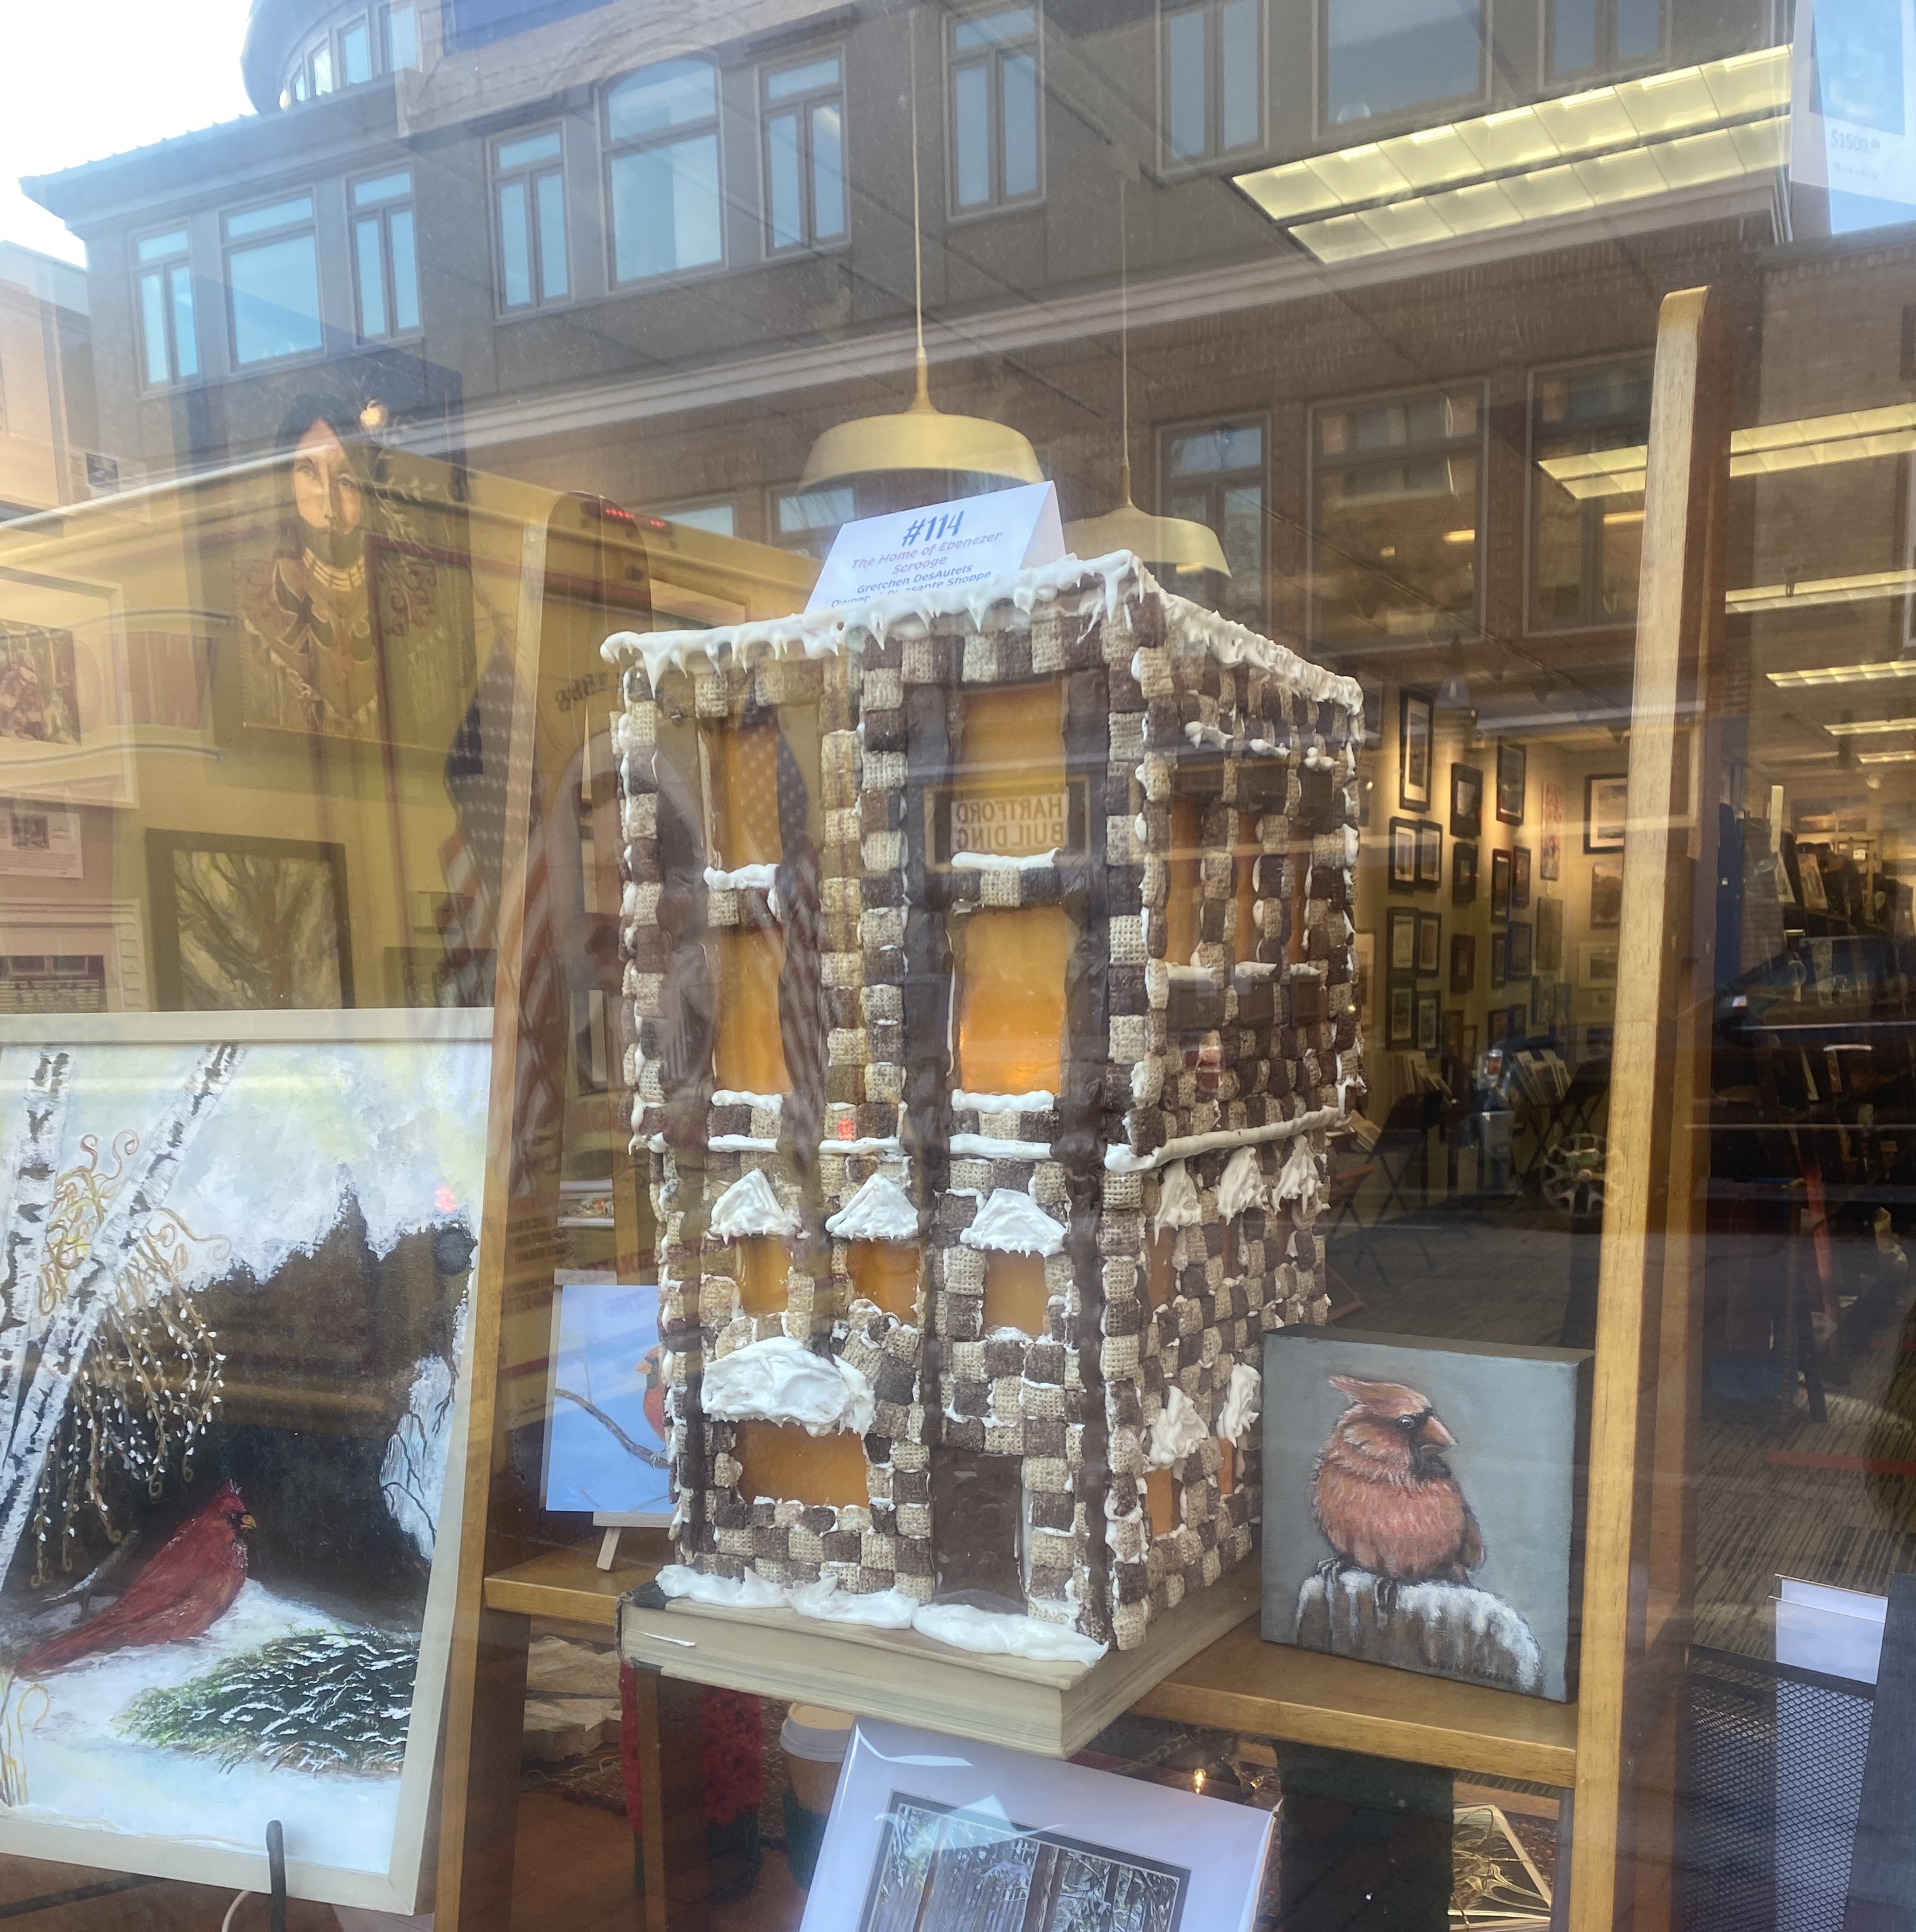 A gingerbread house in a storefront window